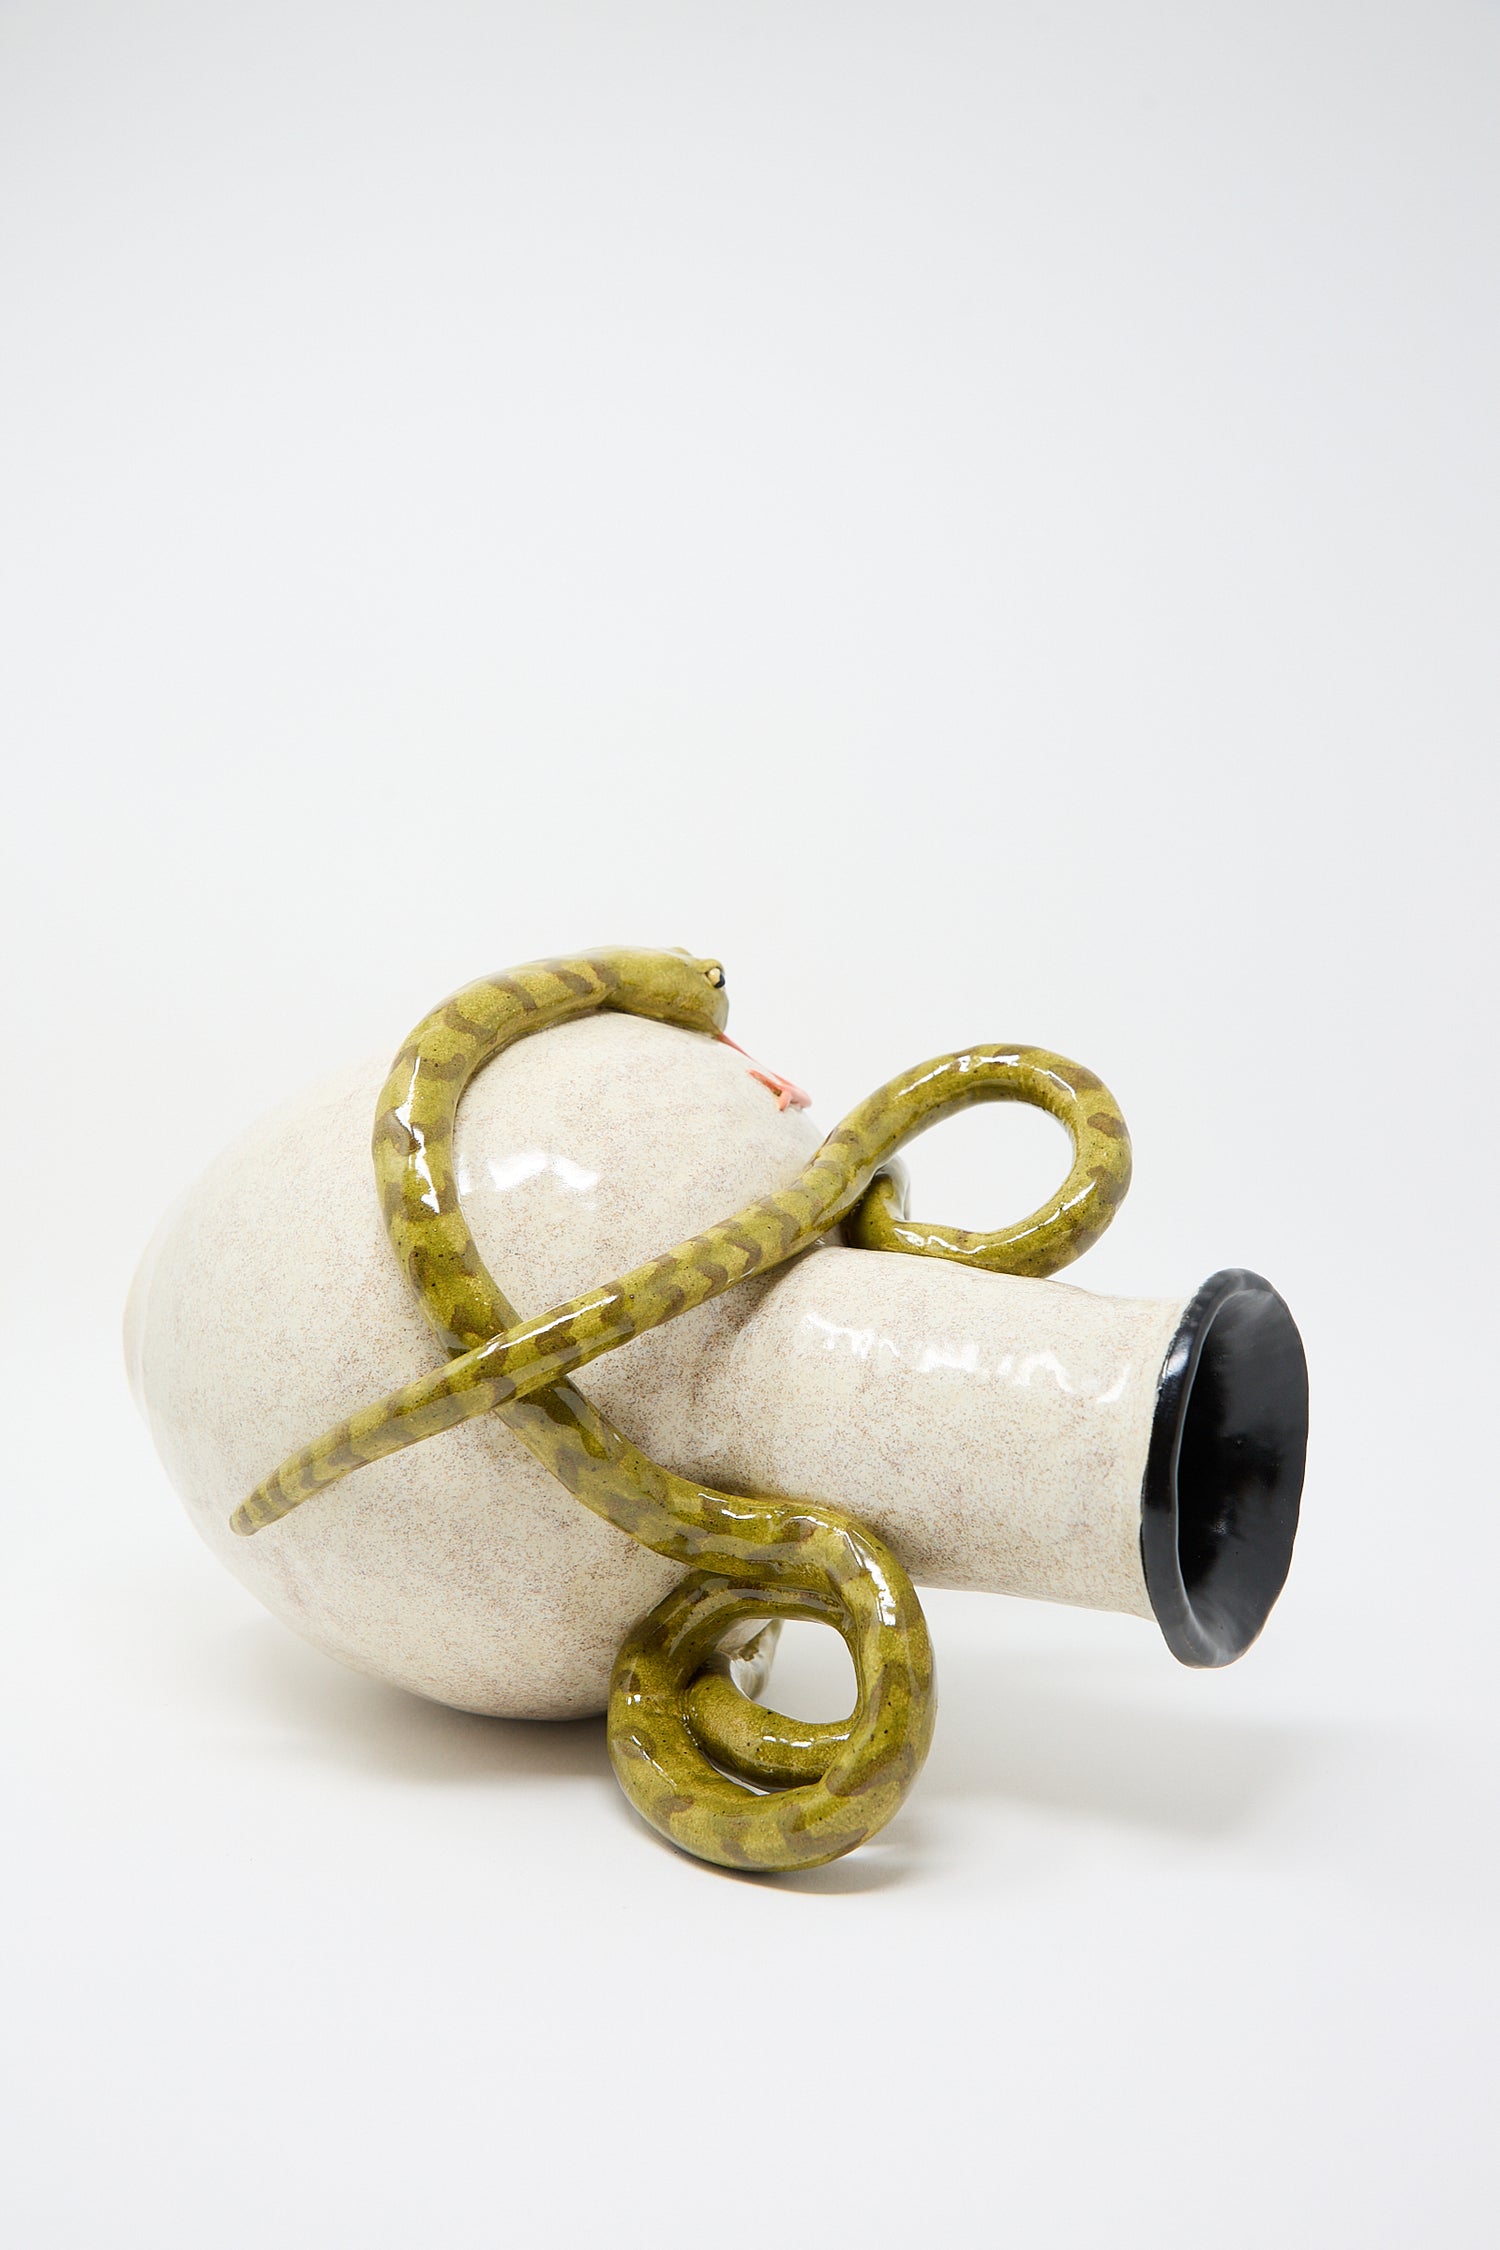 Pearce Williams Snake Amphora Vase with a realistic green snake sculpture wrapped around it, set against a plain white background.